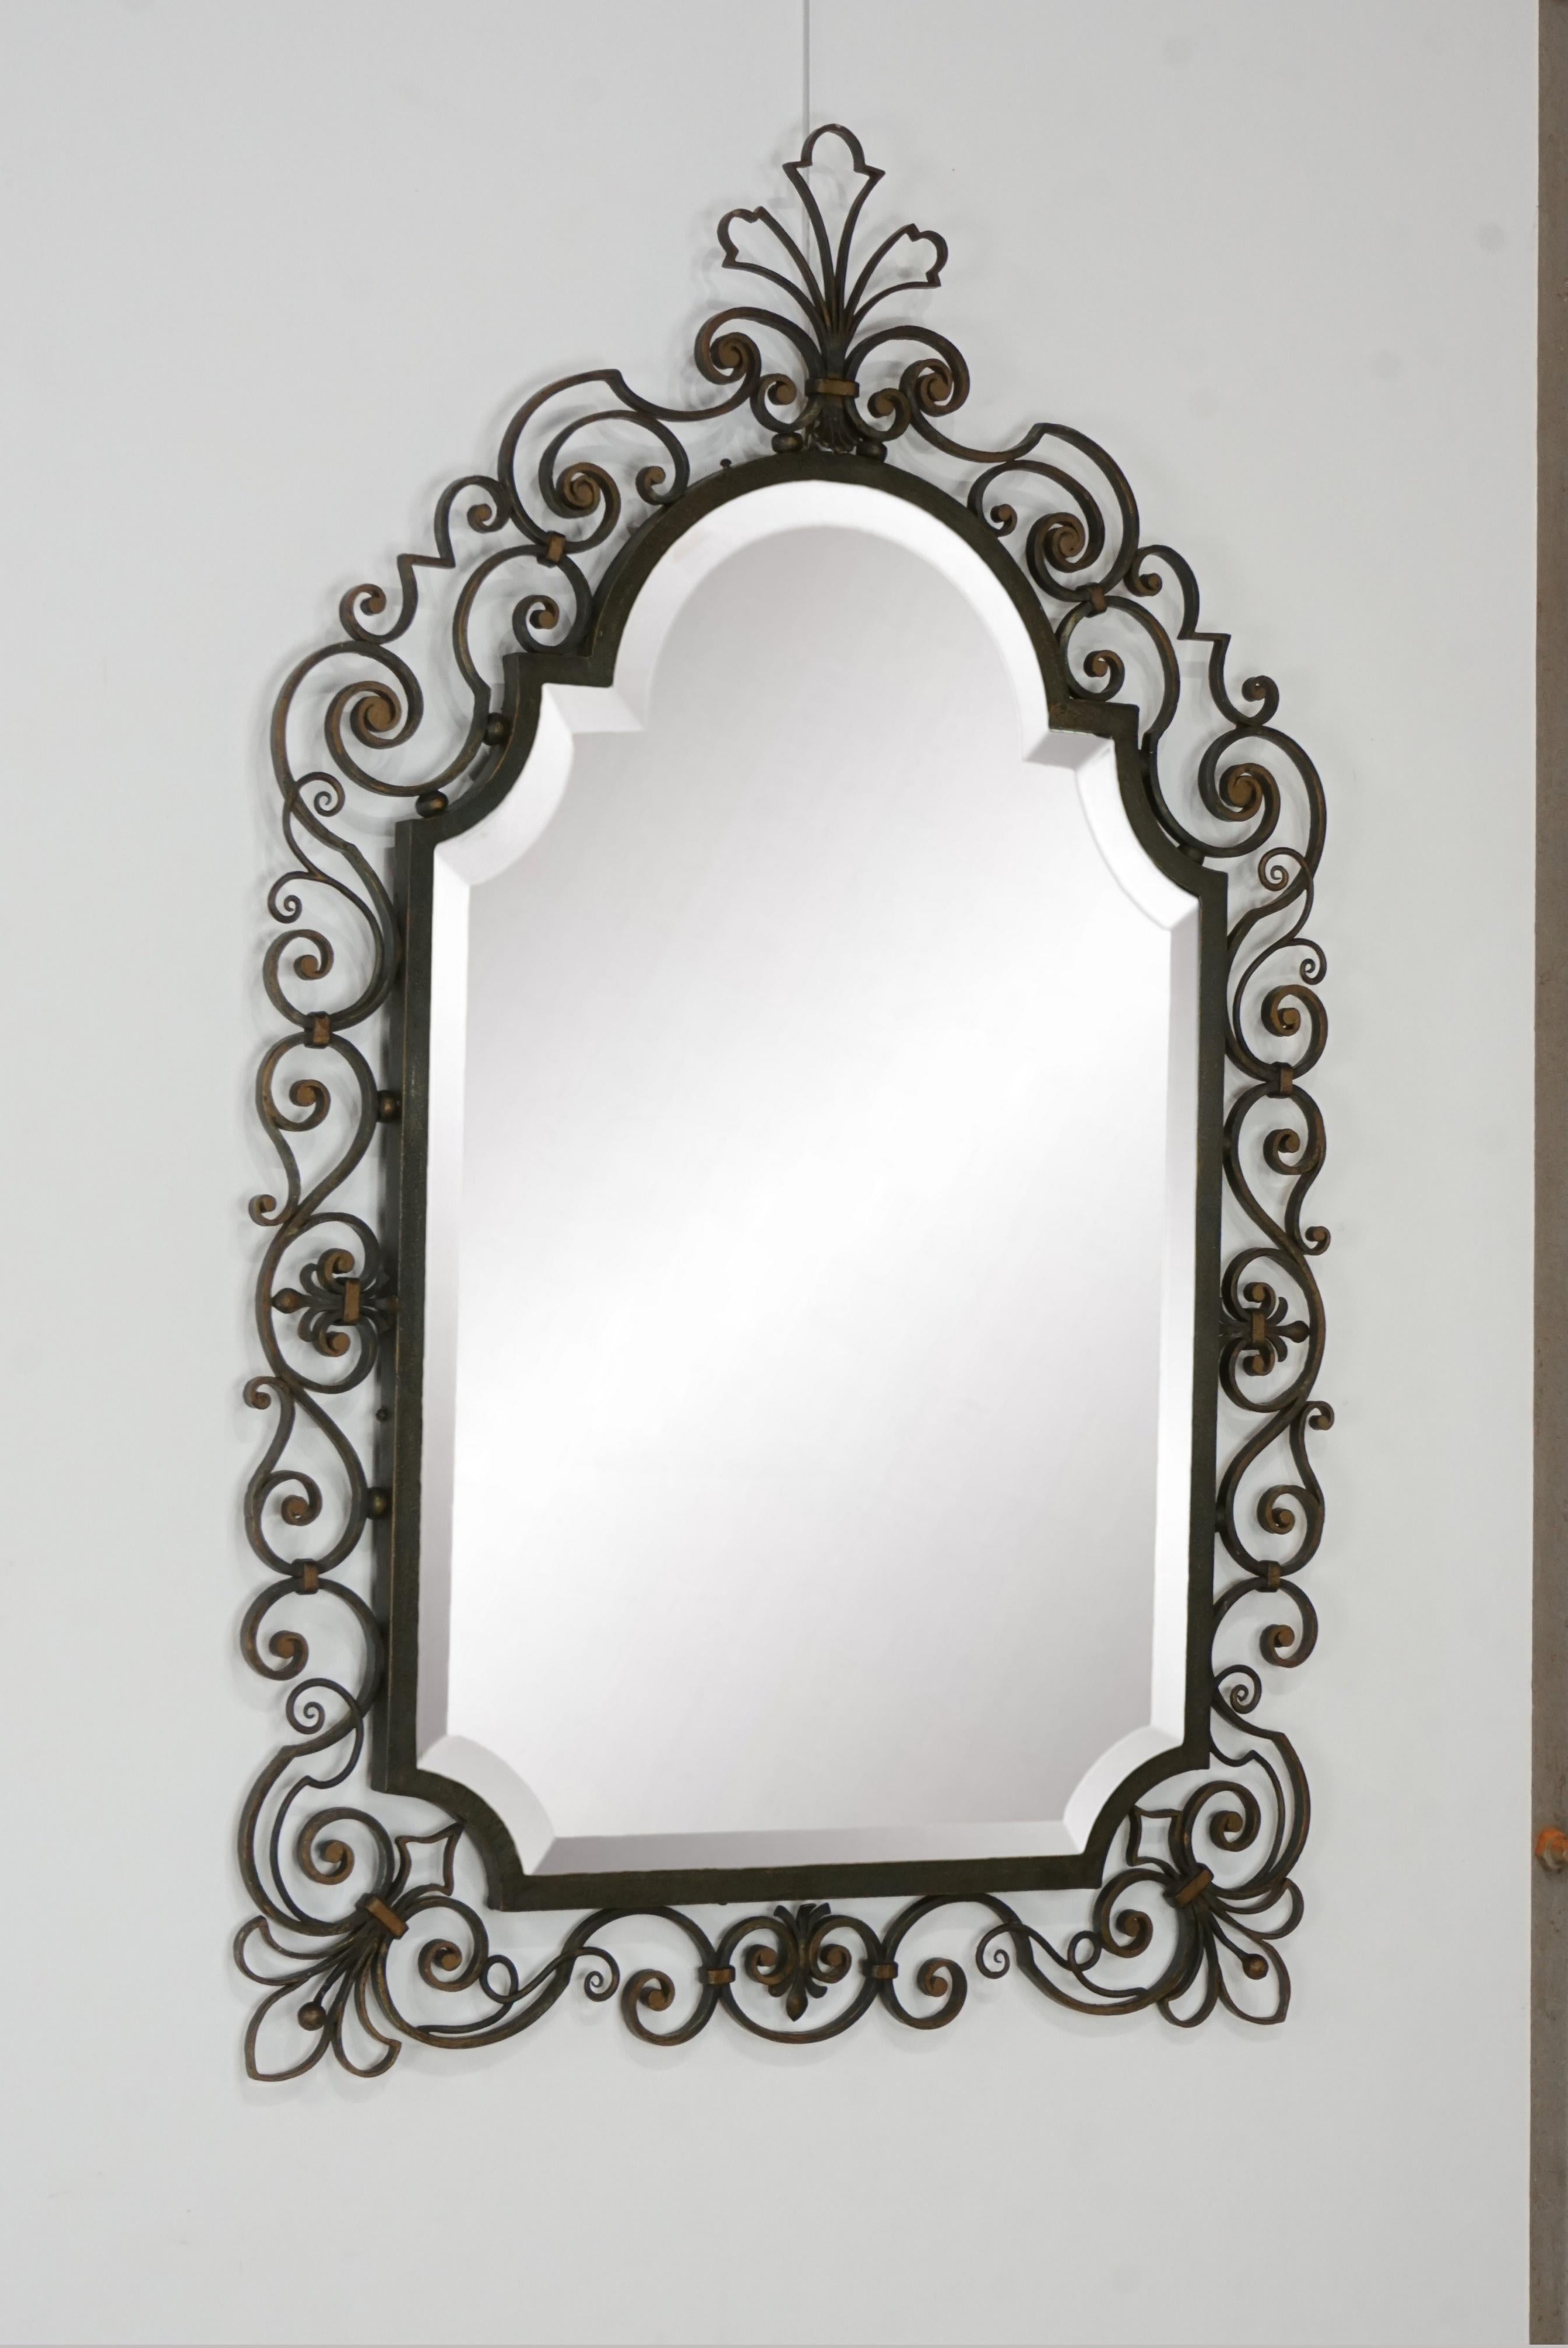 Elegance and beautiful patina for this mirror of the 1950s with black and gild finish wrought iron structure, beautifully crafted adorning a beautiful beveled mirror